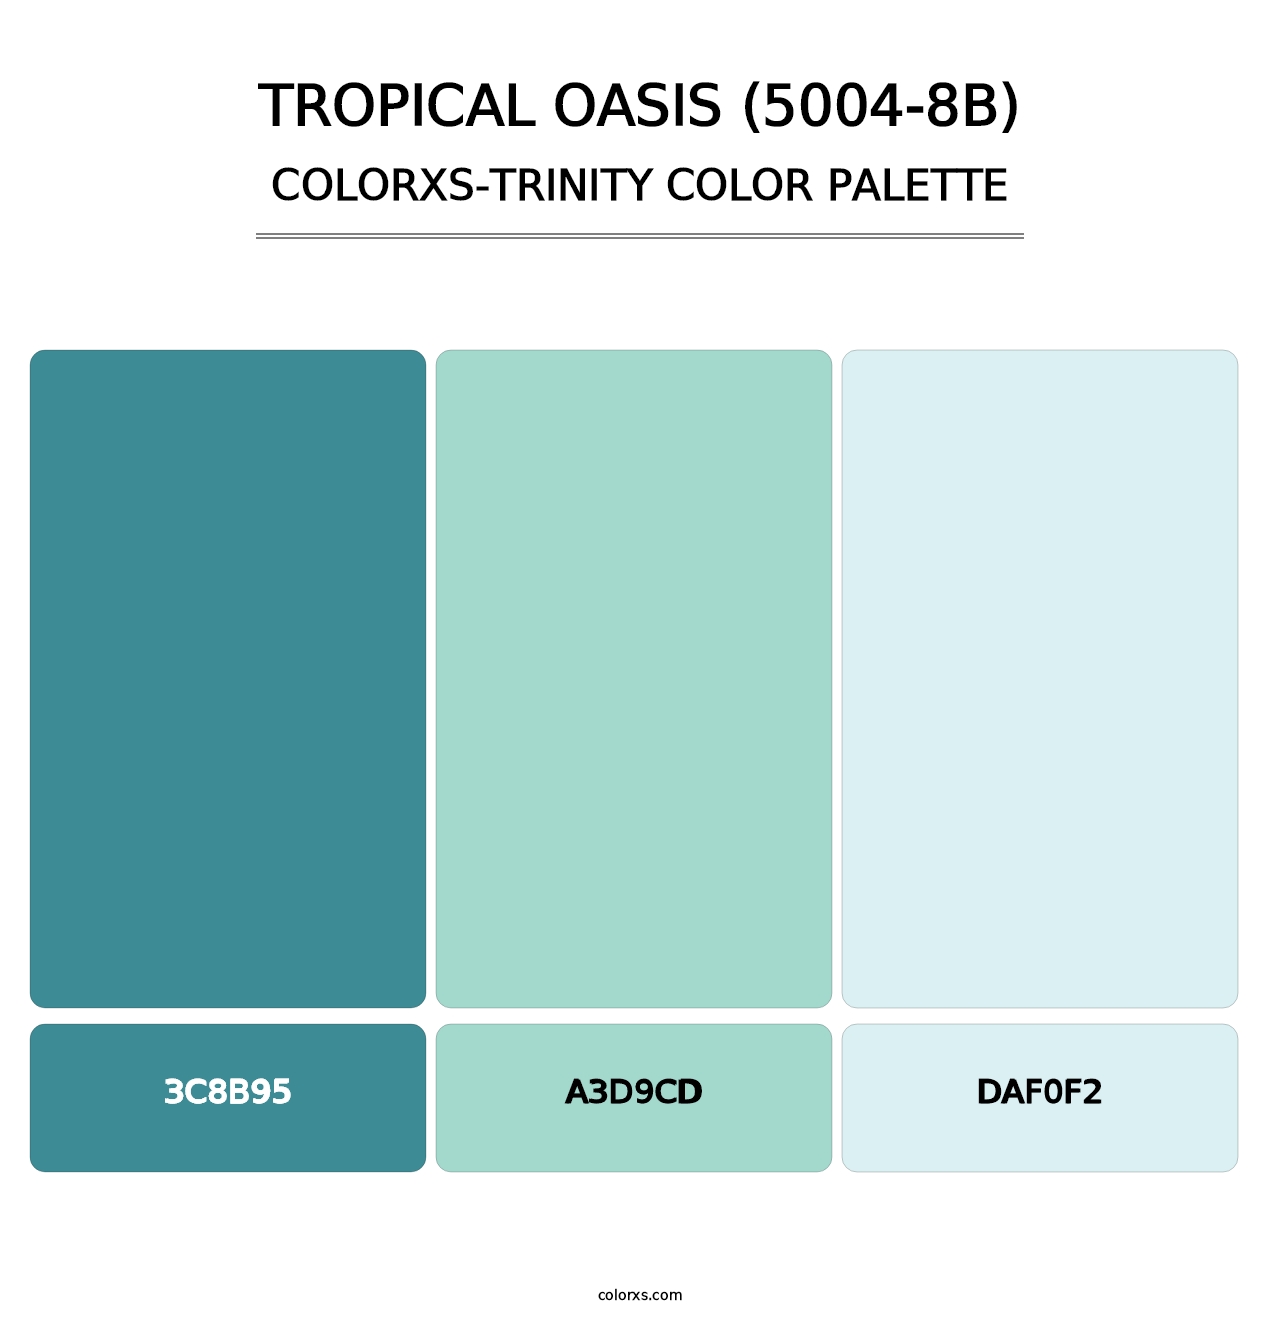 Tropical Oasis (5004-8B) - Colorxs Trinity Palette